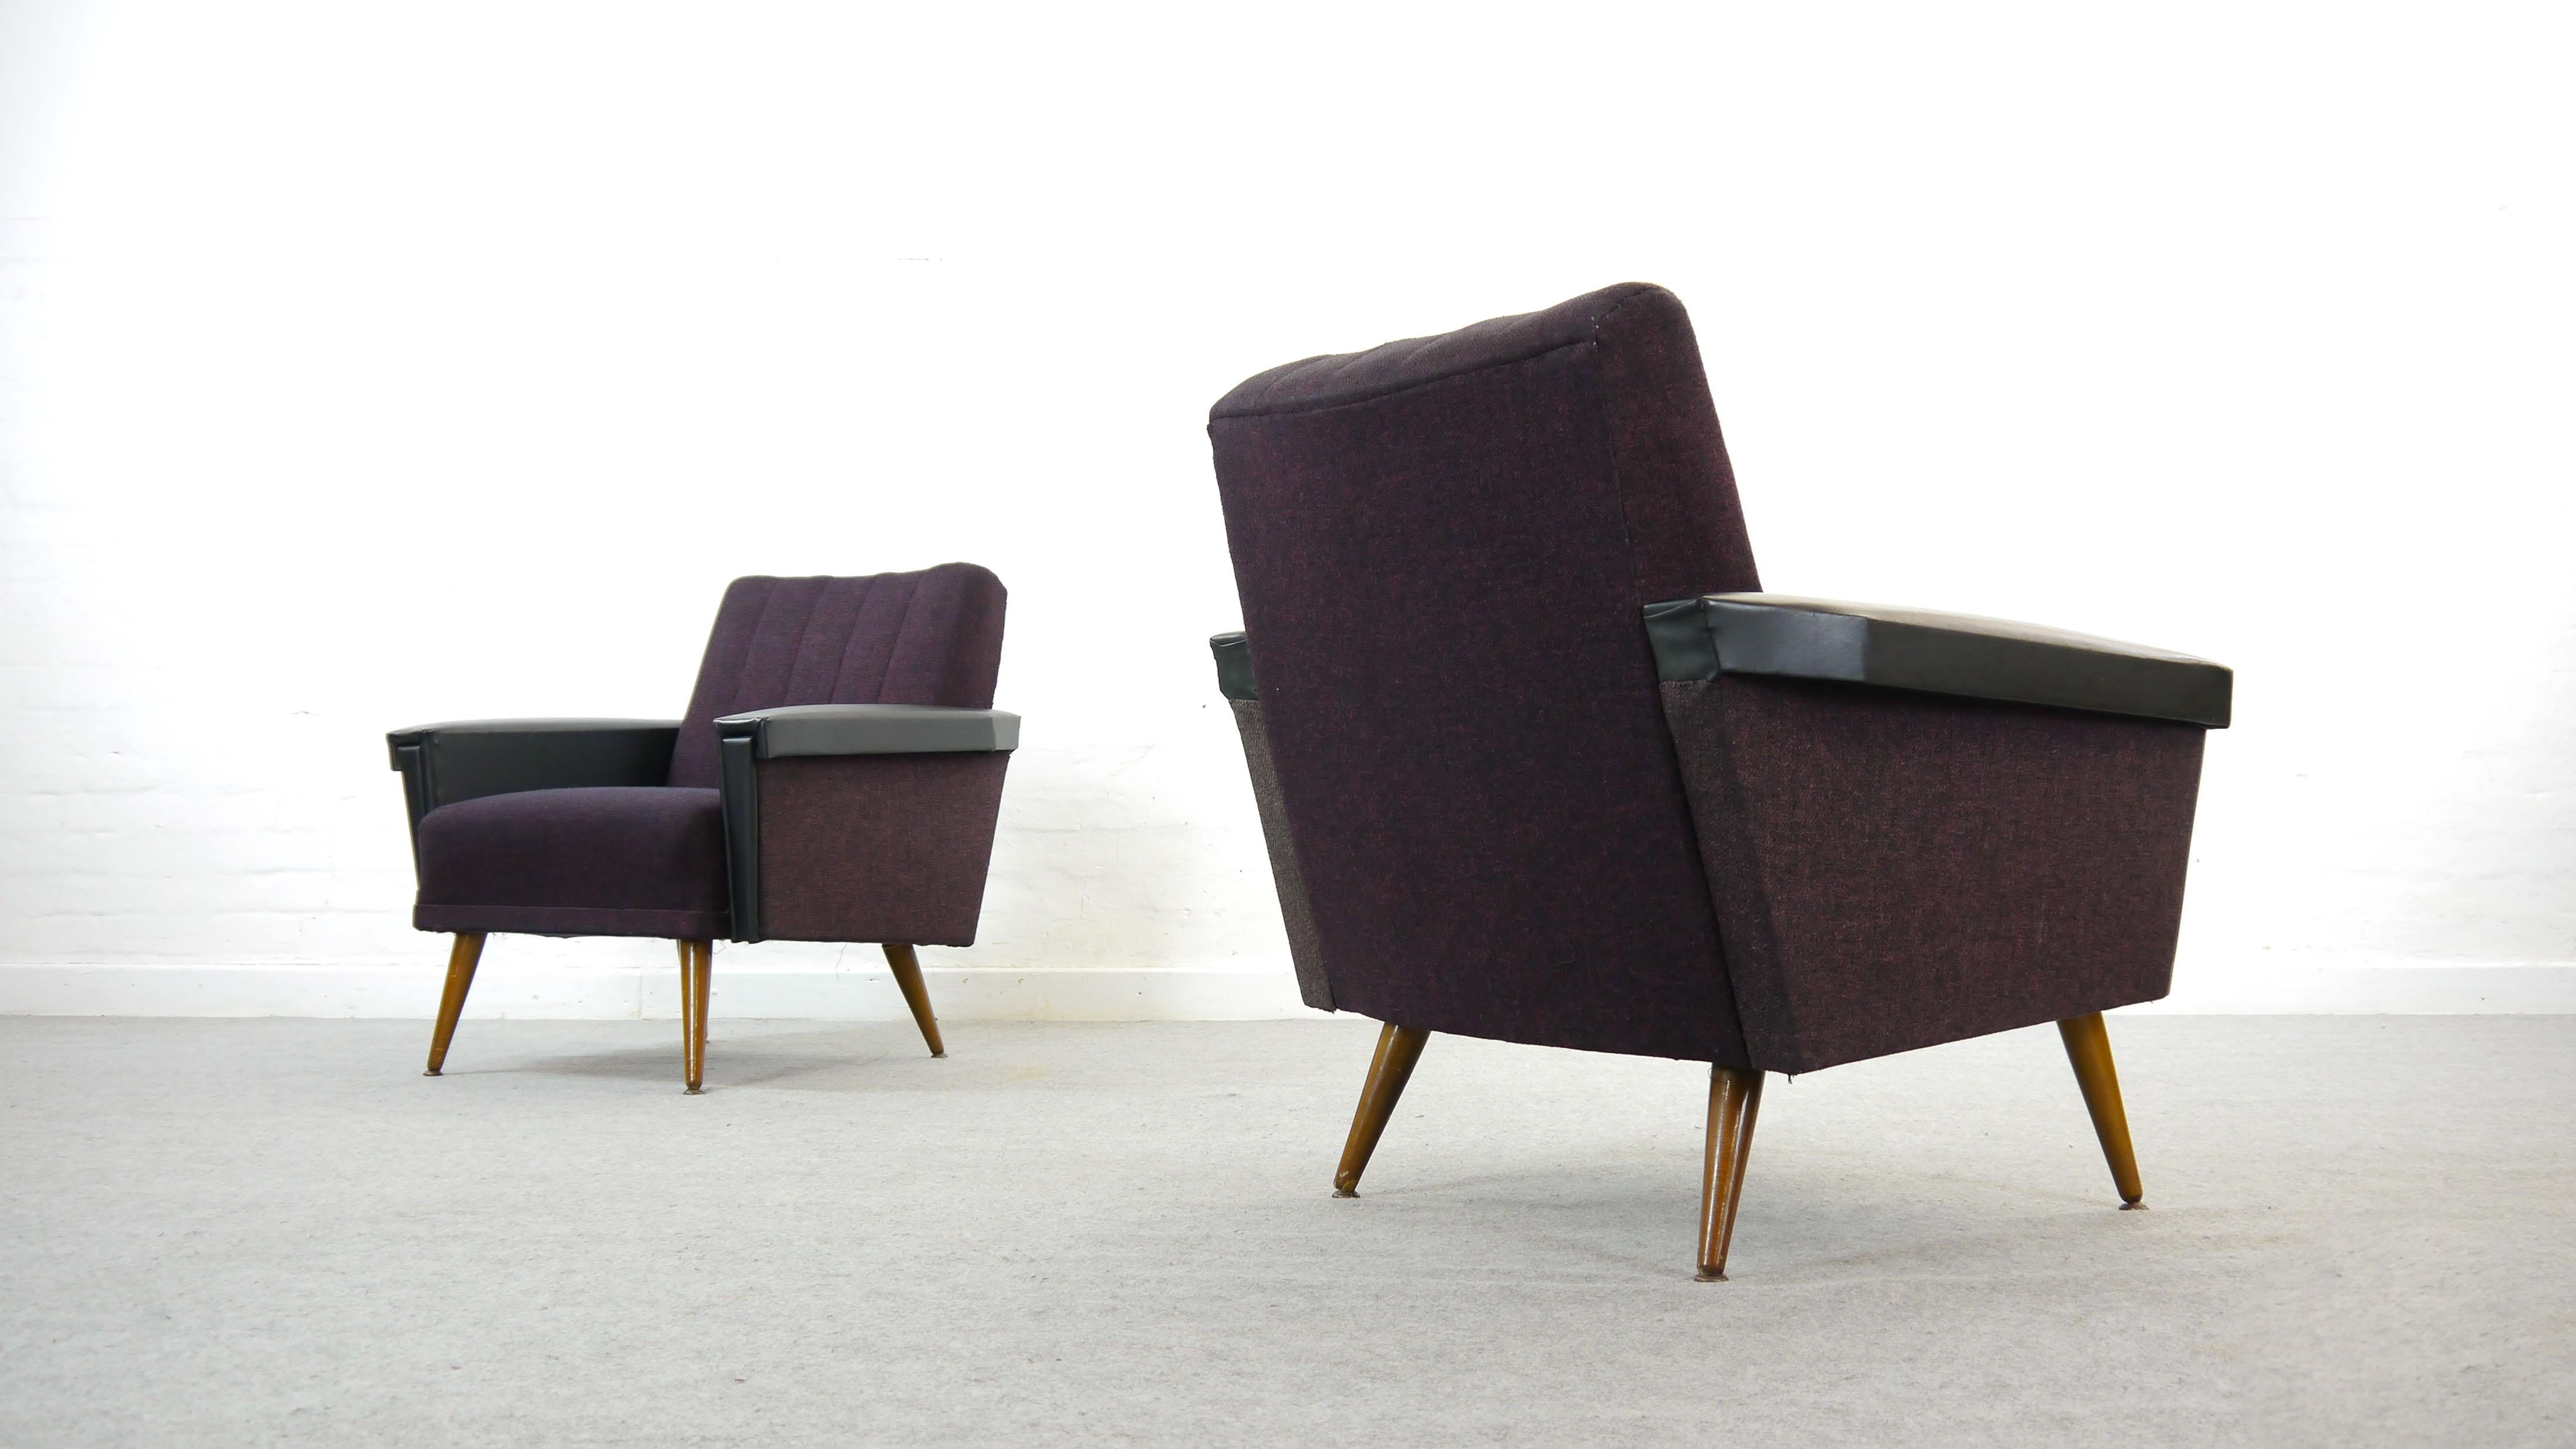 German Vintage Pair of Midcentury Cocktail Chairs or Club Chairs in Purple-Black, 1950s For Sale